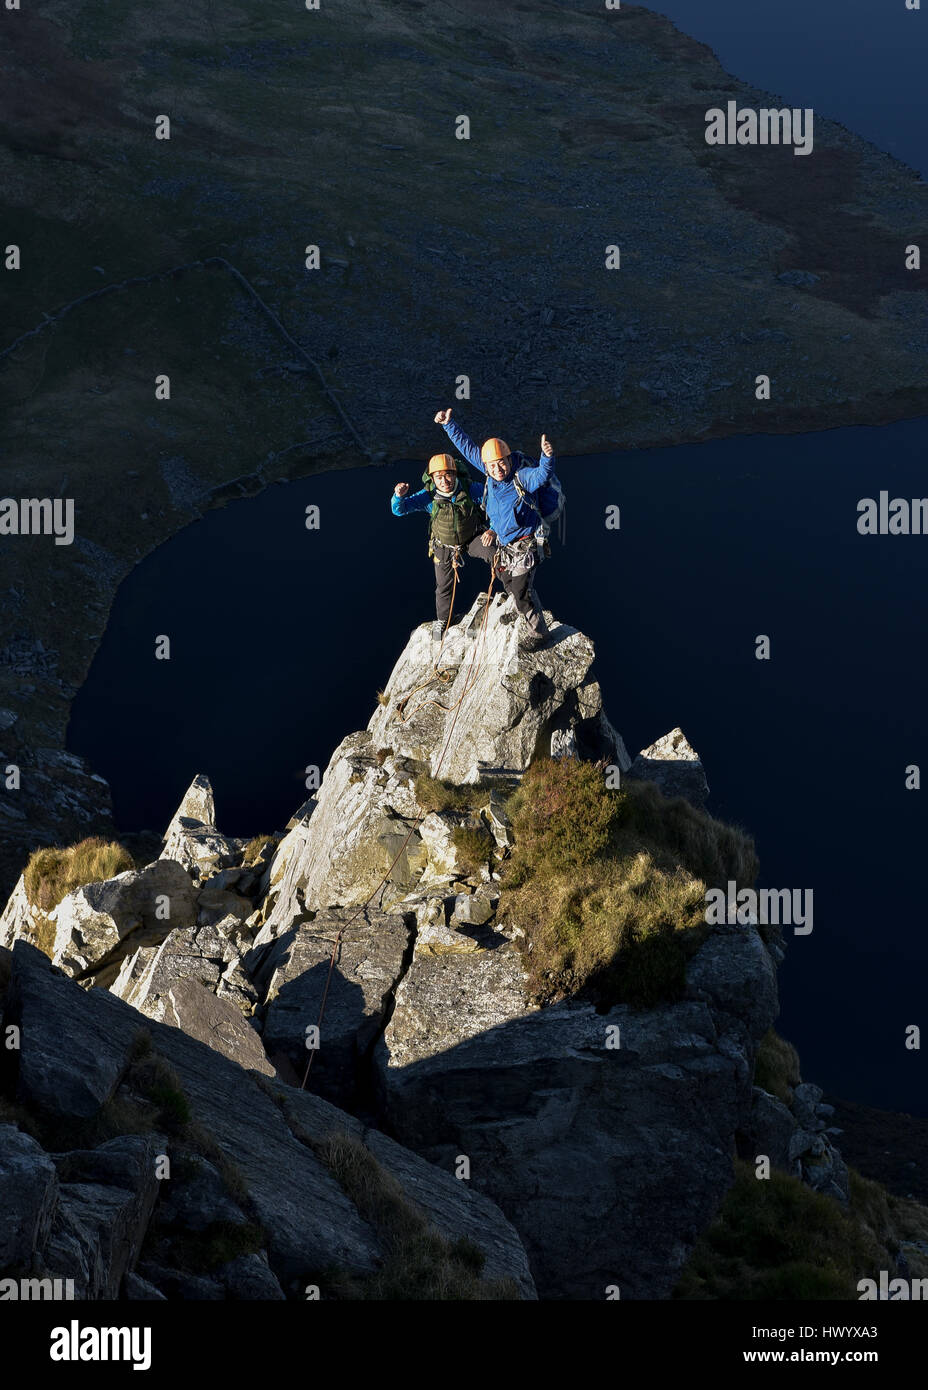 UK, North Wales, Snowdonia, Craig Cwm Silyn, two mountaineers on Outside Edge Route Stock Photo